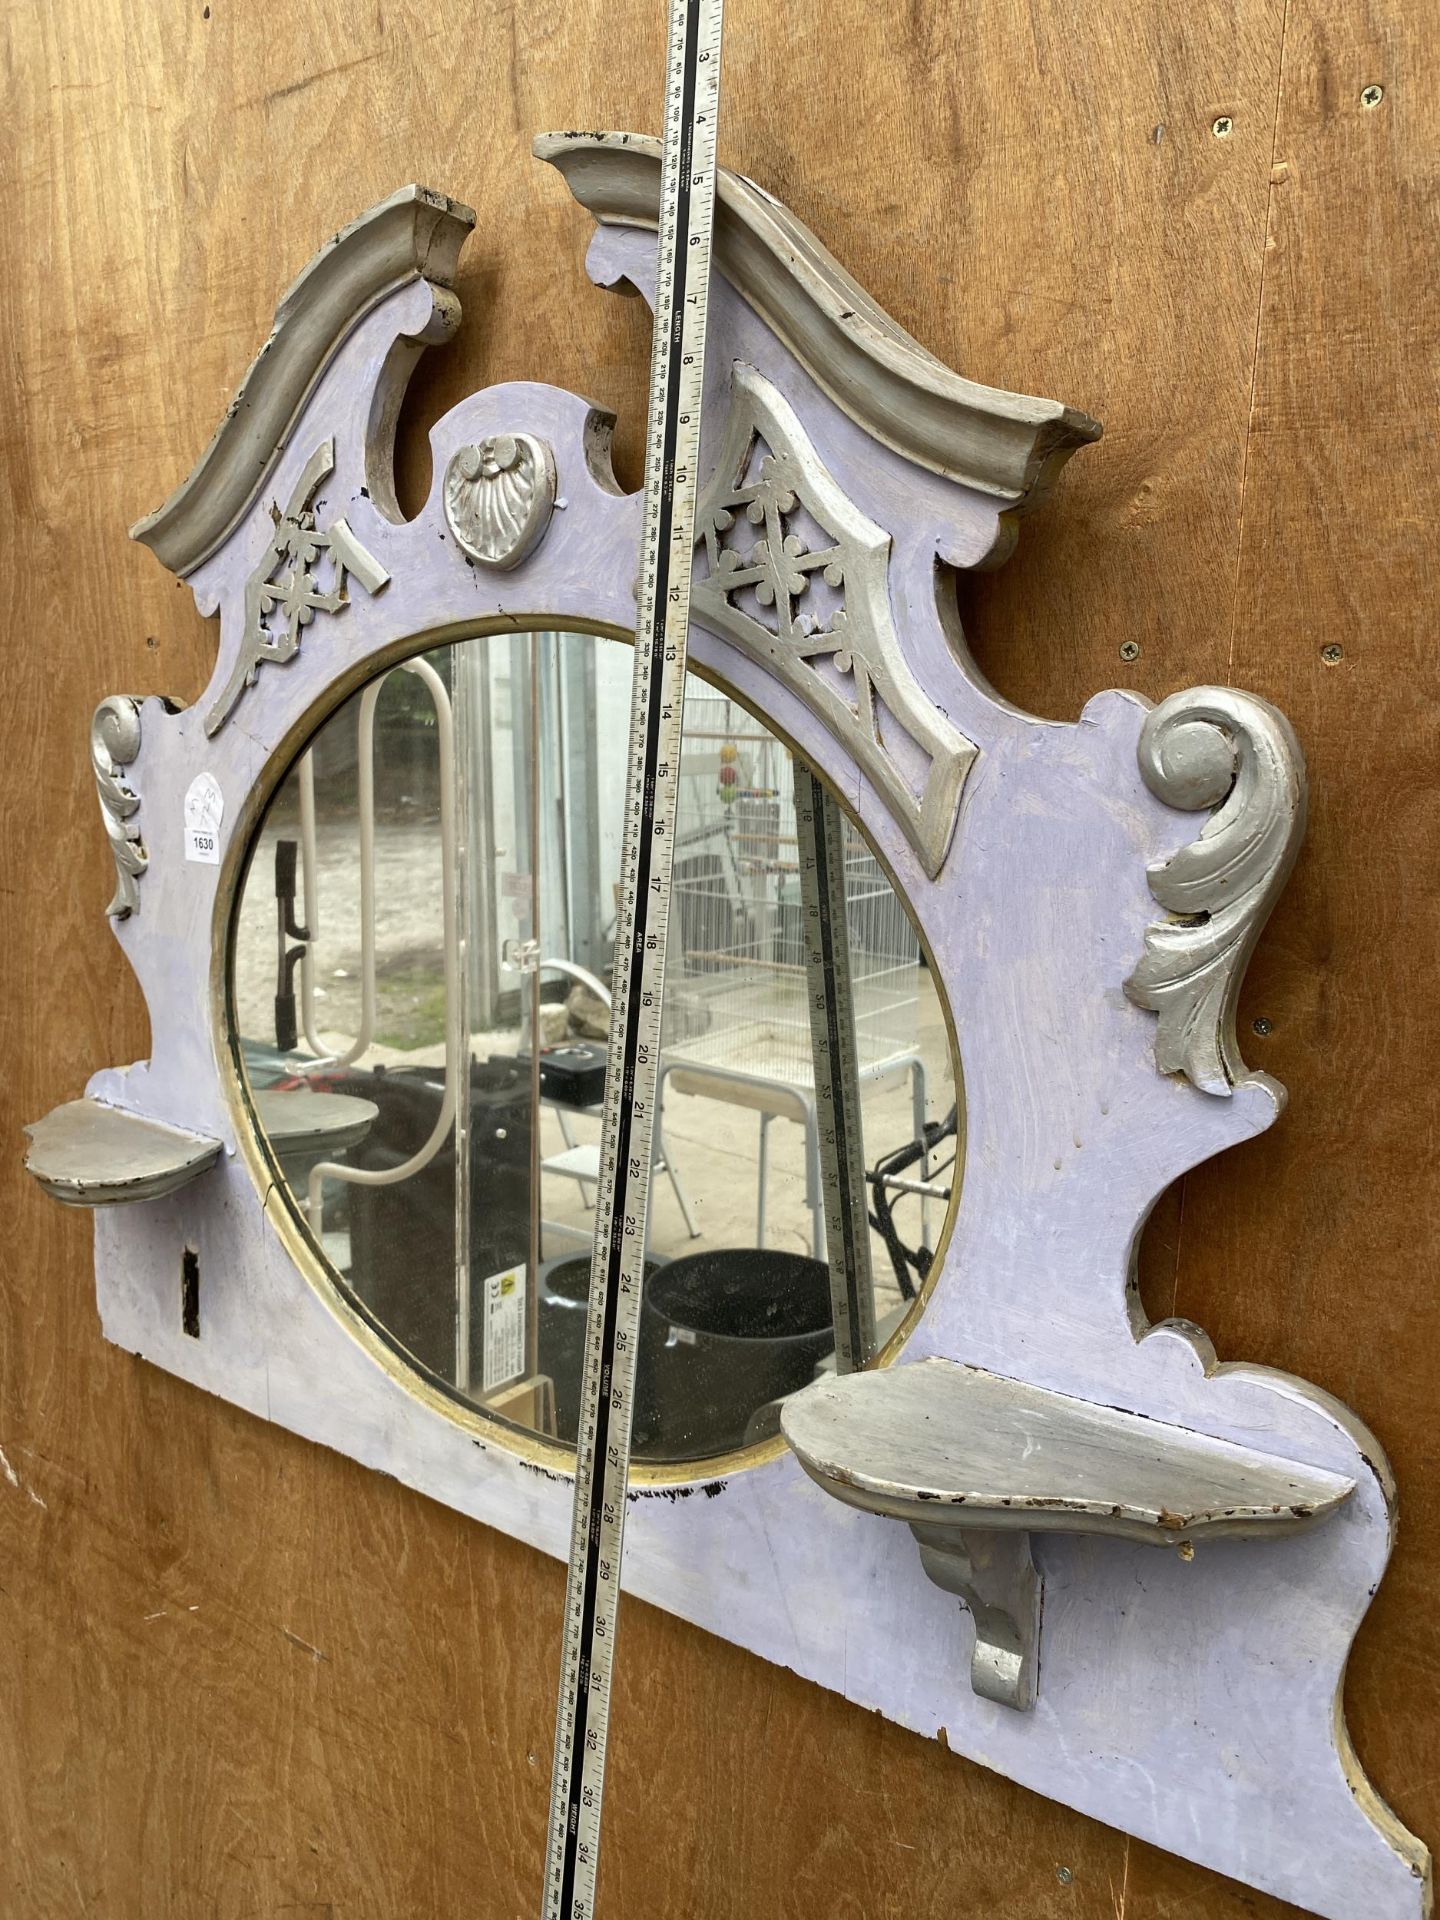 A PAINTED WOODEN SHABBY CHIC MIRROR - Image 4 of 4